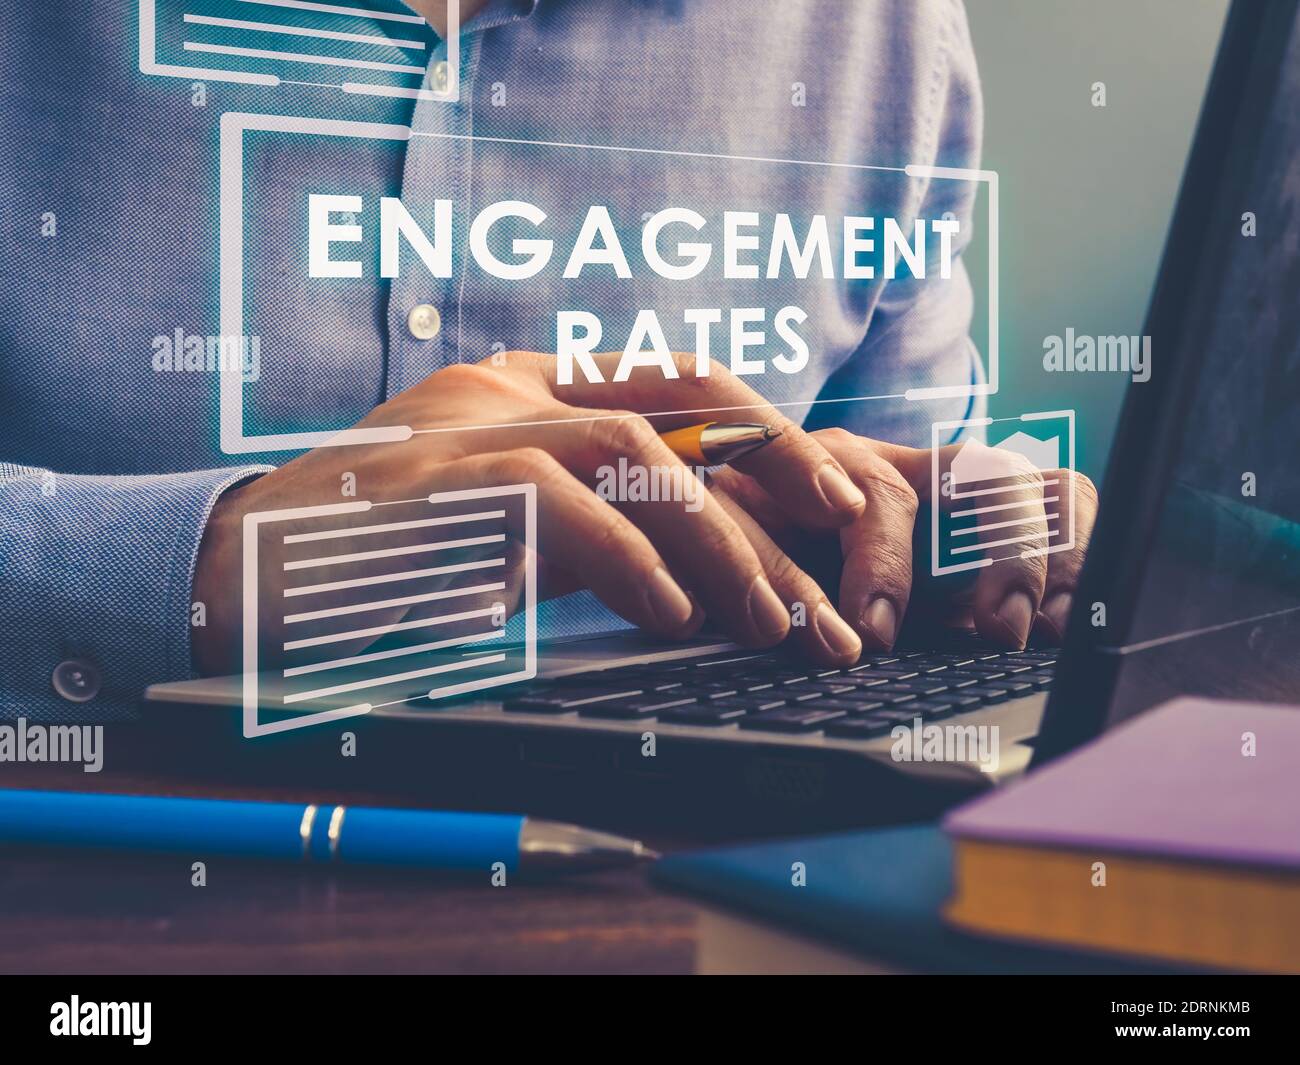 Engagement Rates sign on screen. A man works on a laptop. Stock Photo